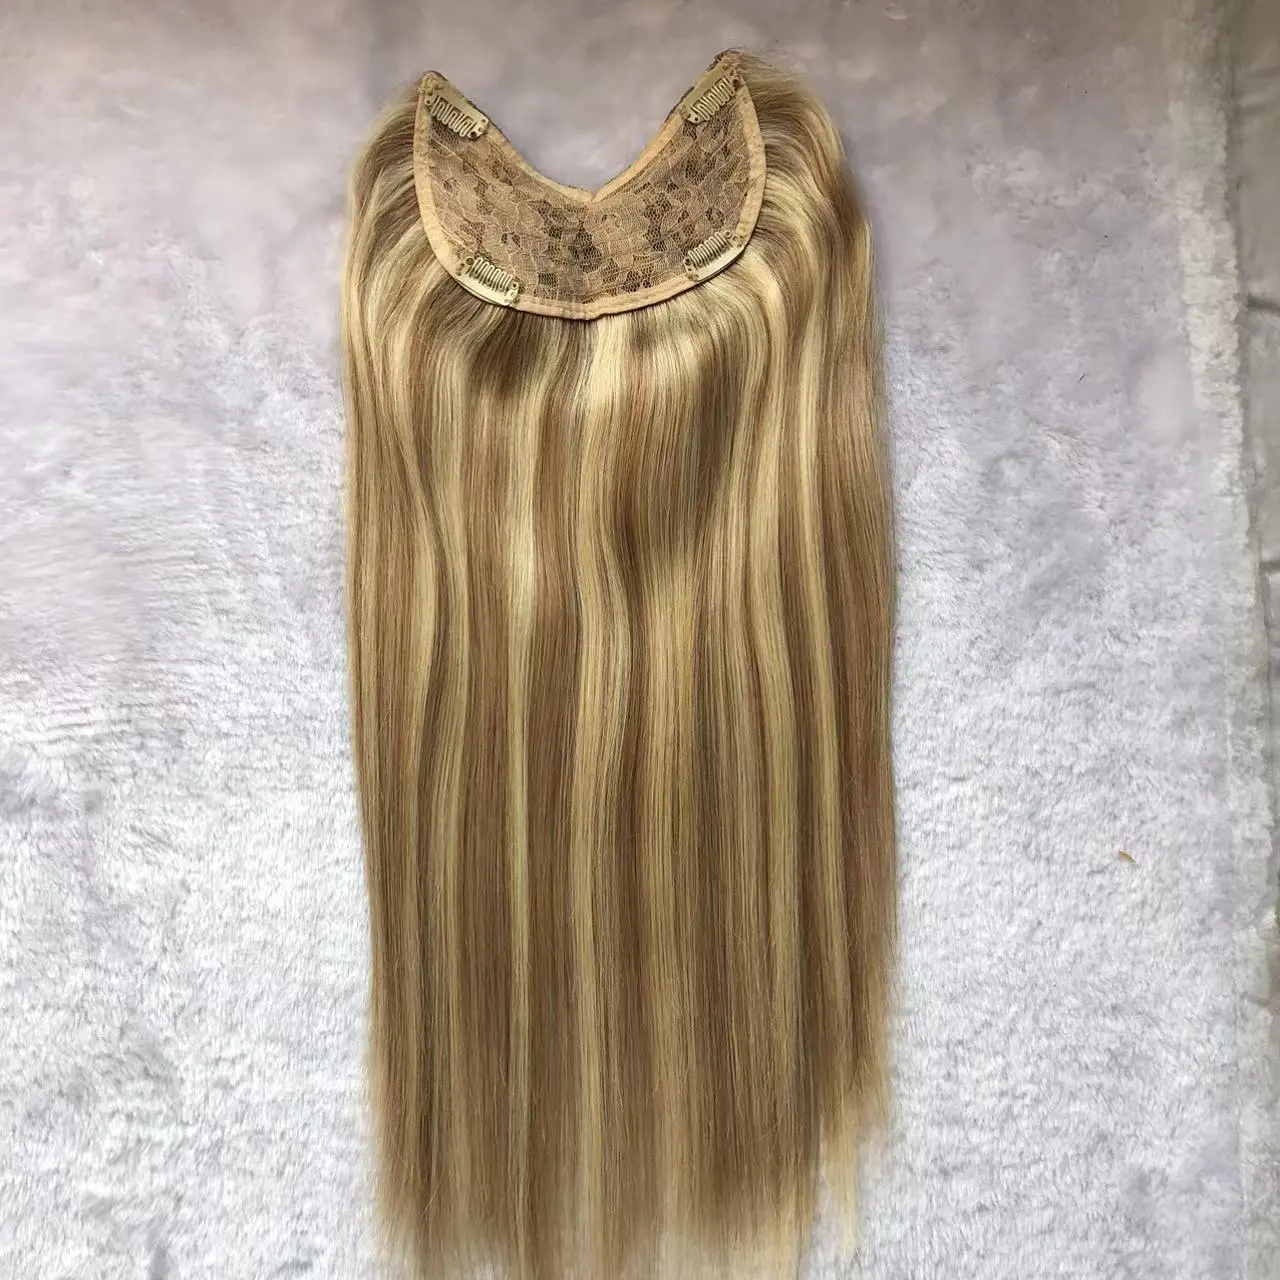 One-Piece Seamless European Virgin Female Cuticle Aligned Ombre Long Straight Hair Machine Made U-shaped Hair Extension Topper